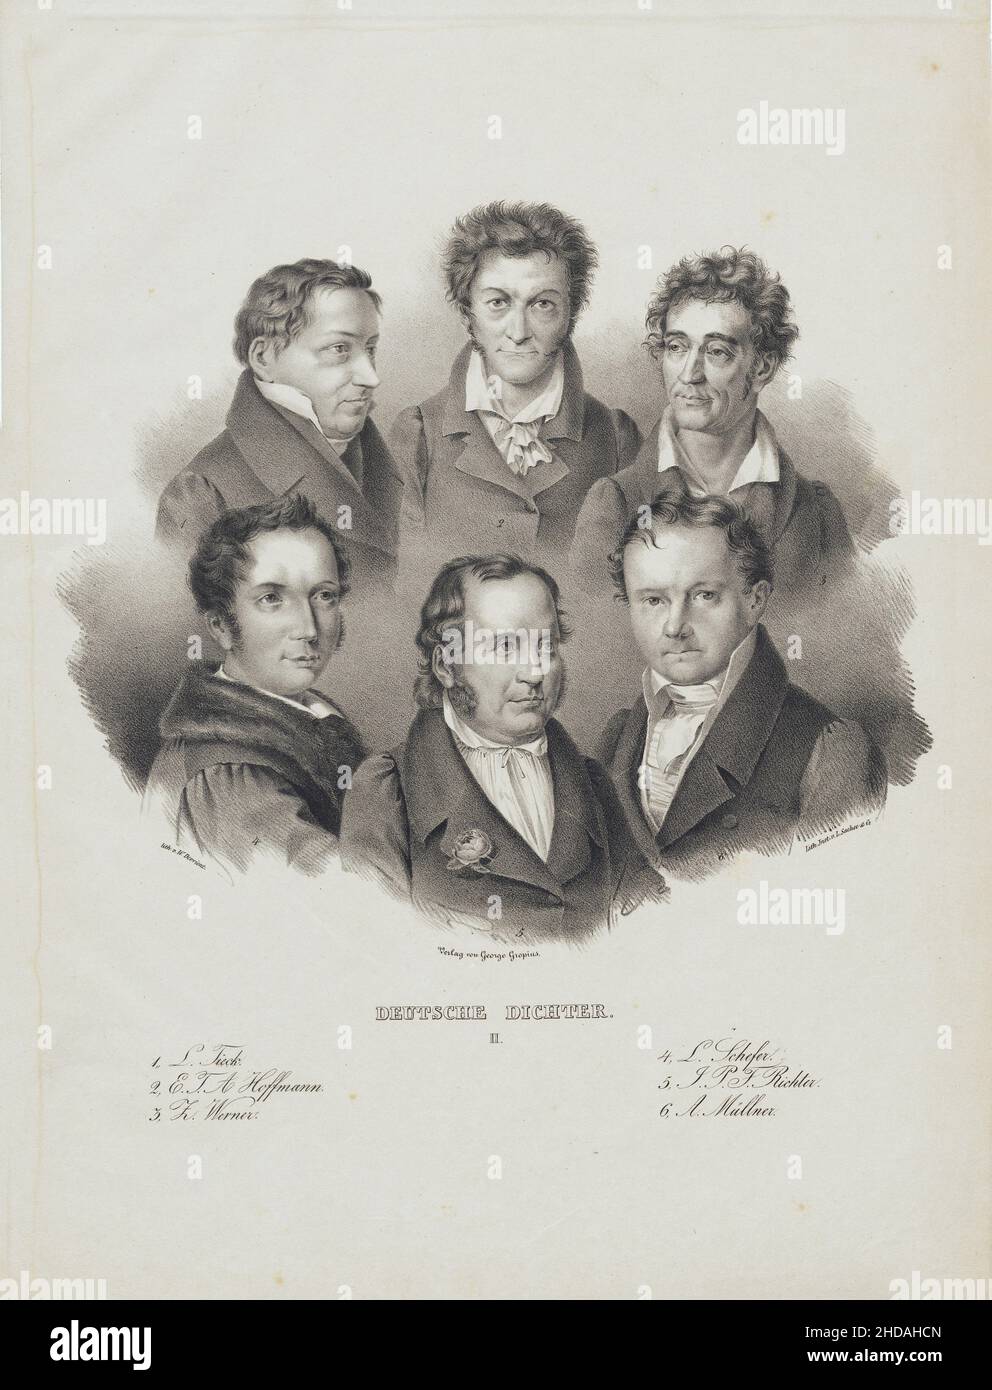 Vintage portraits of German poets of the 19th century: 1. L. Tieck. 2. E. T. A. Hoffmann. 3. Z. Werner. 4. L. Schefer. 5. J. P. F. Richter. 6. A. Müll Stock Photo